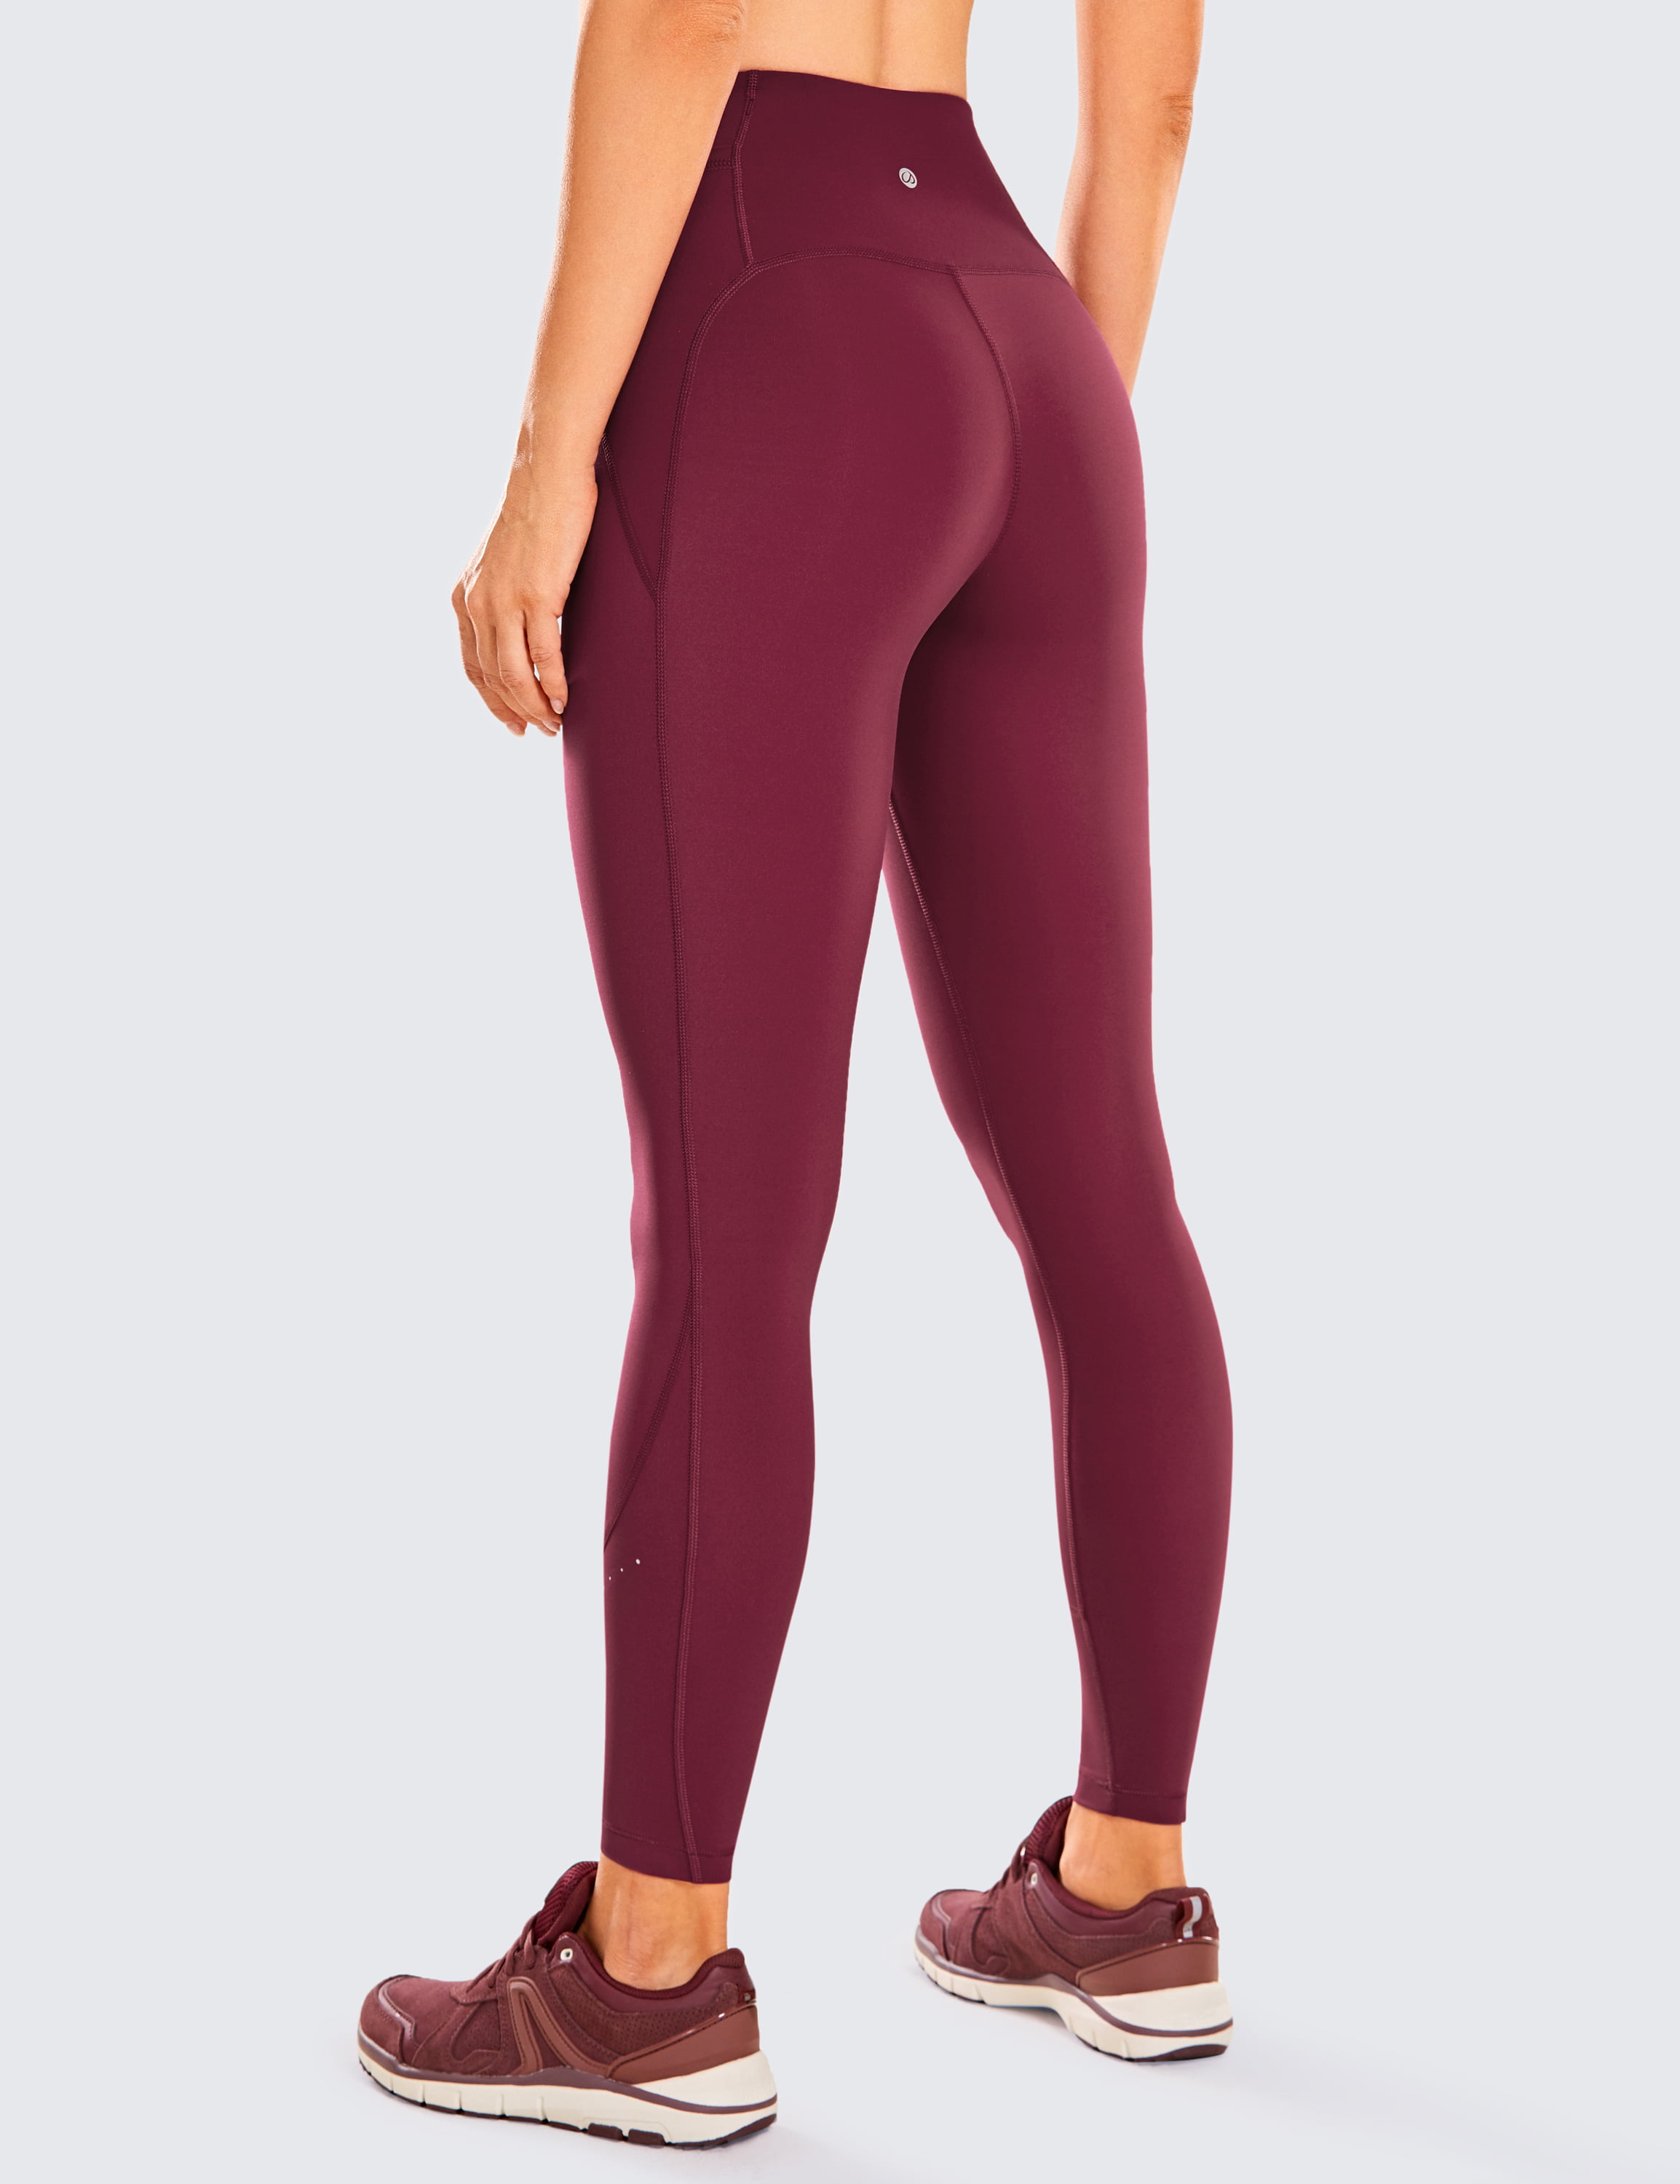 CRZ YOGA Naked Feeling Women's Workout Leggings 7/8 High Waisted Yoga Pants  with Side Pocket-25 Inches - Walmart.com